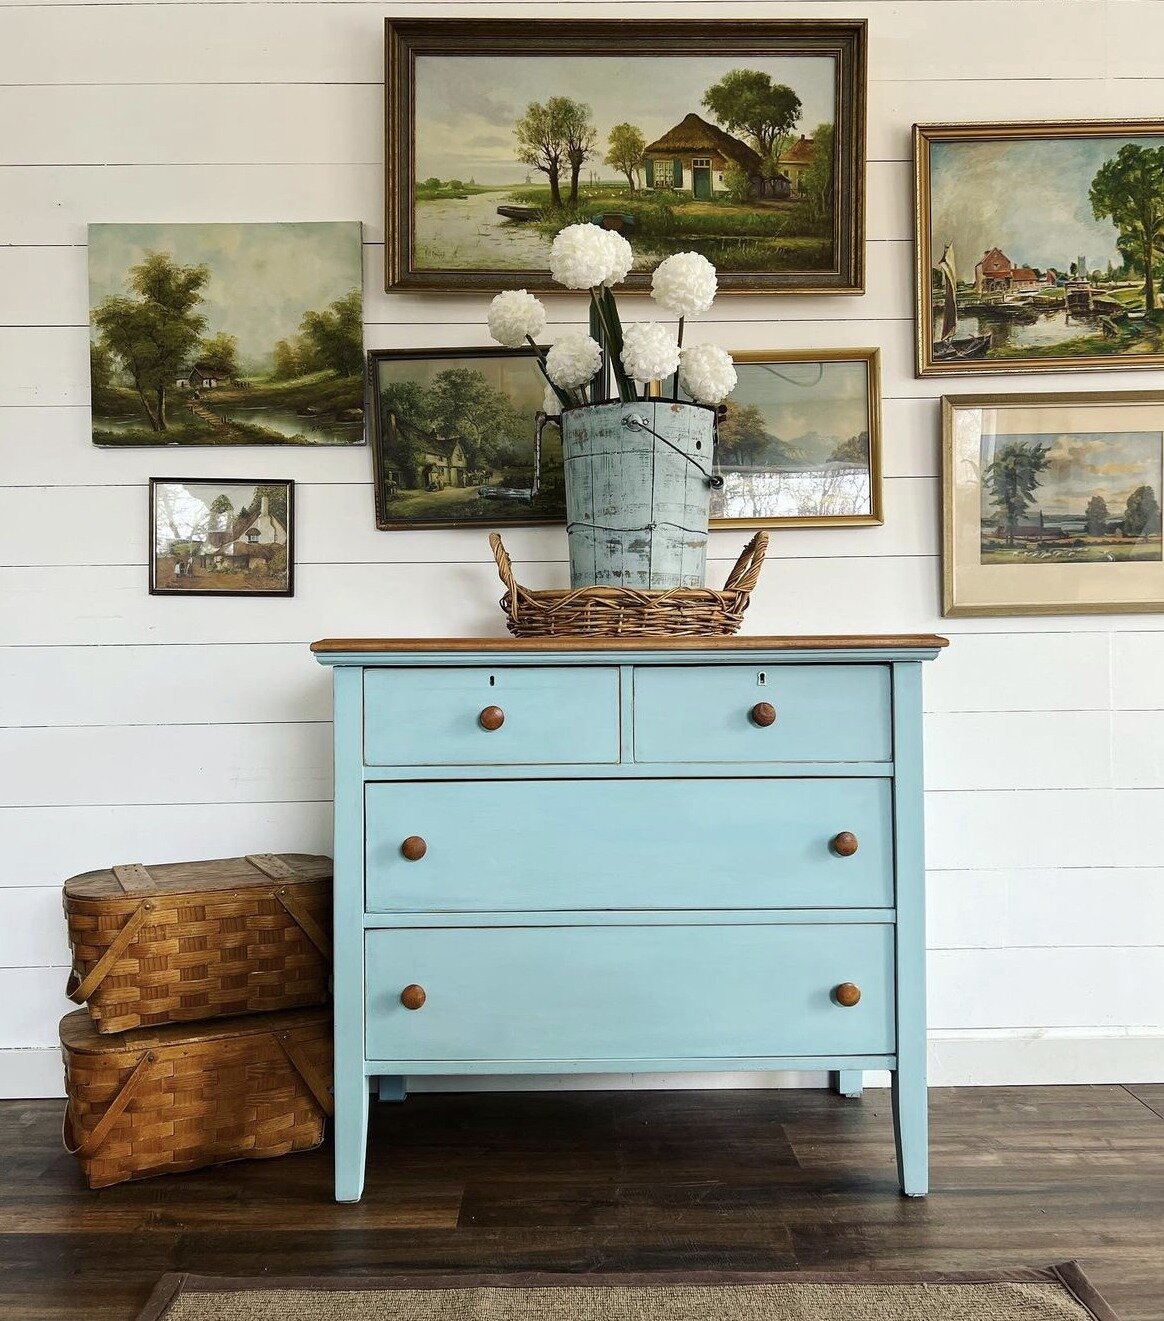 Aqua Sky is a cheerful shade of seafoam that is perfect for spring! @perfectlyimperfect55555 refinished this maple chest in Aqua Sky. It looks lovely paired with the wooden top and drawer pulls. 

Shop or find a retailer at the link in our bio! 

#mm